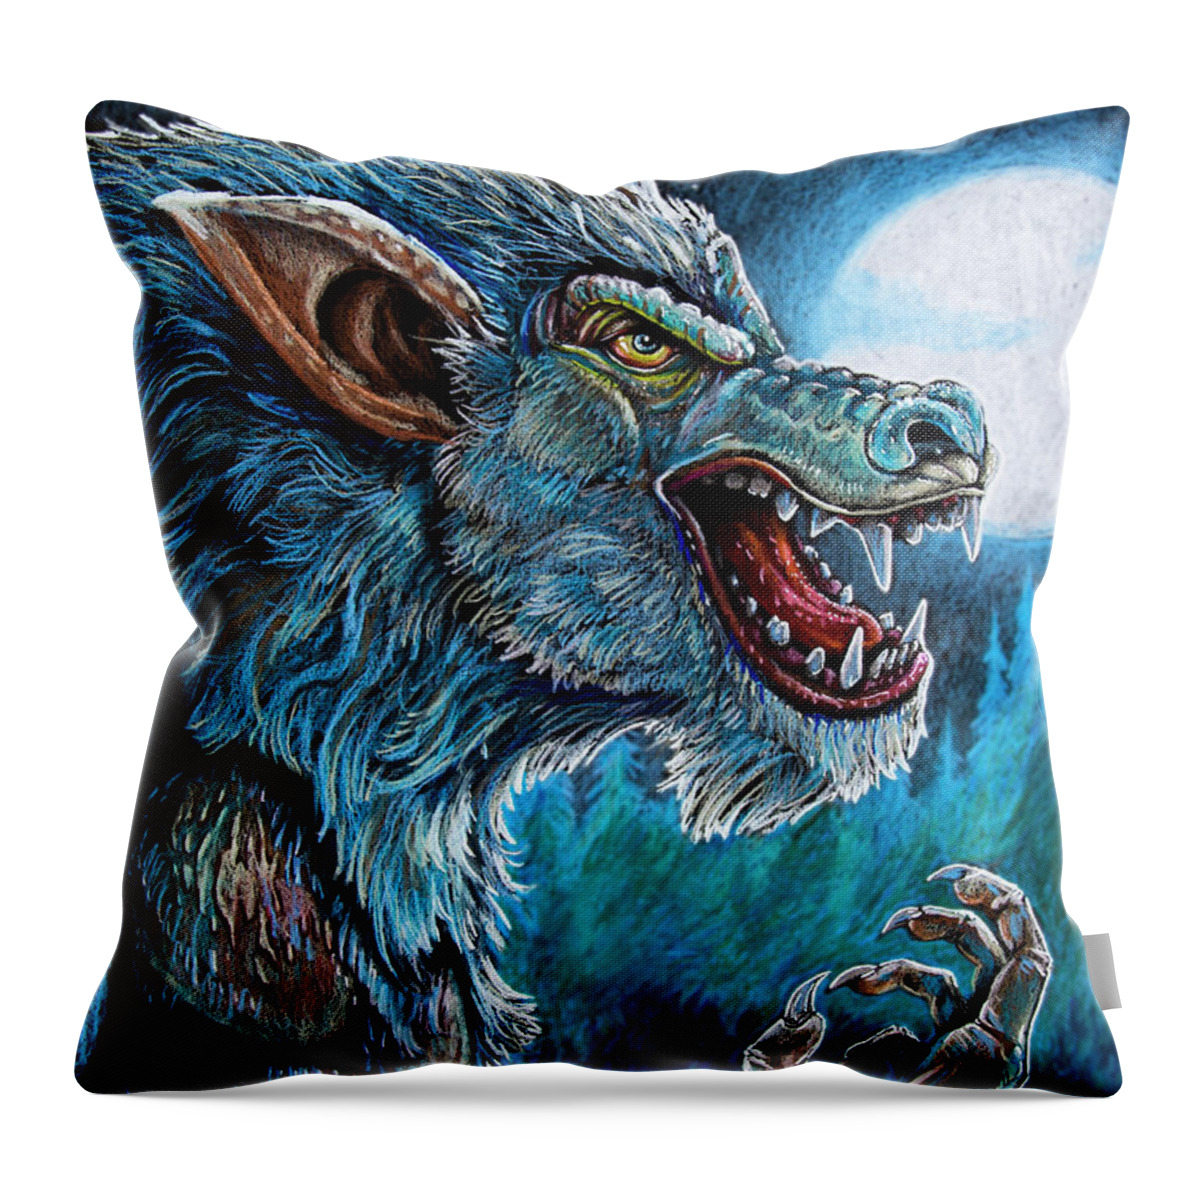 Werewolf Throw Pillow featuring the drawing Werewolf by Aaron Spong